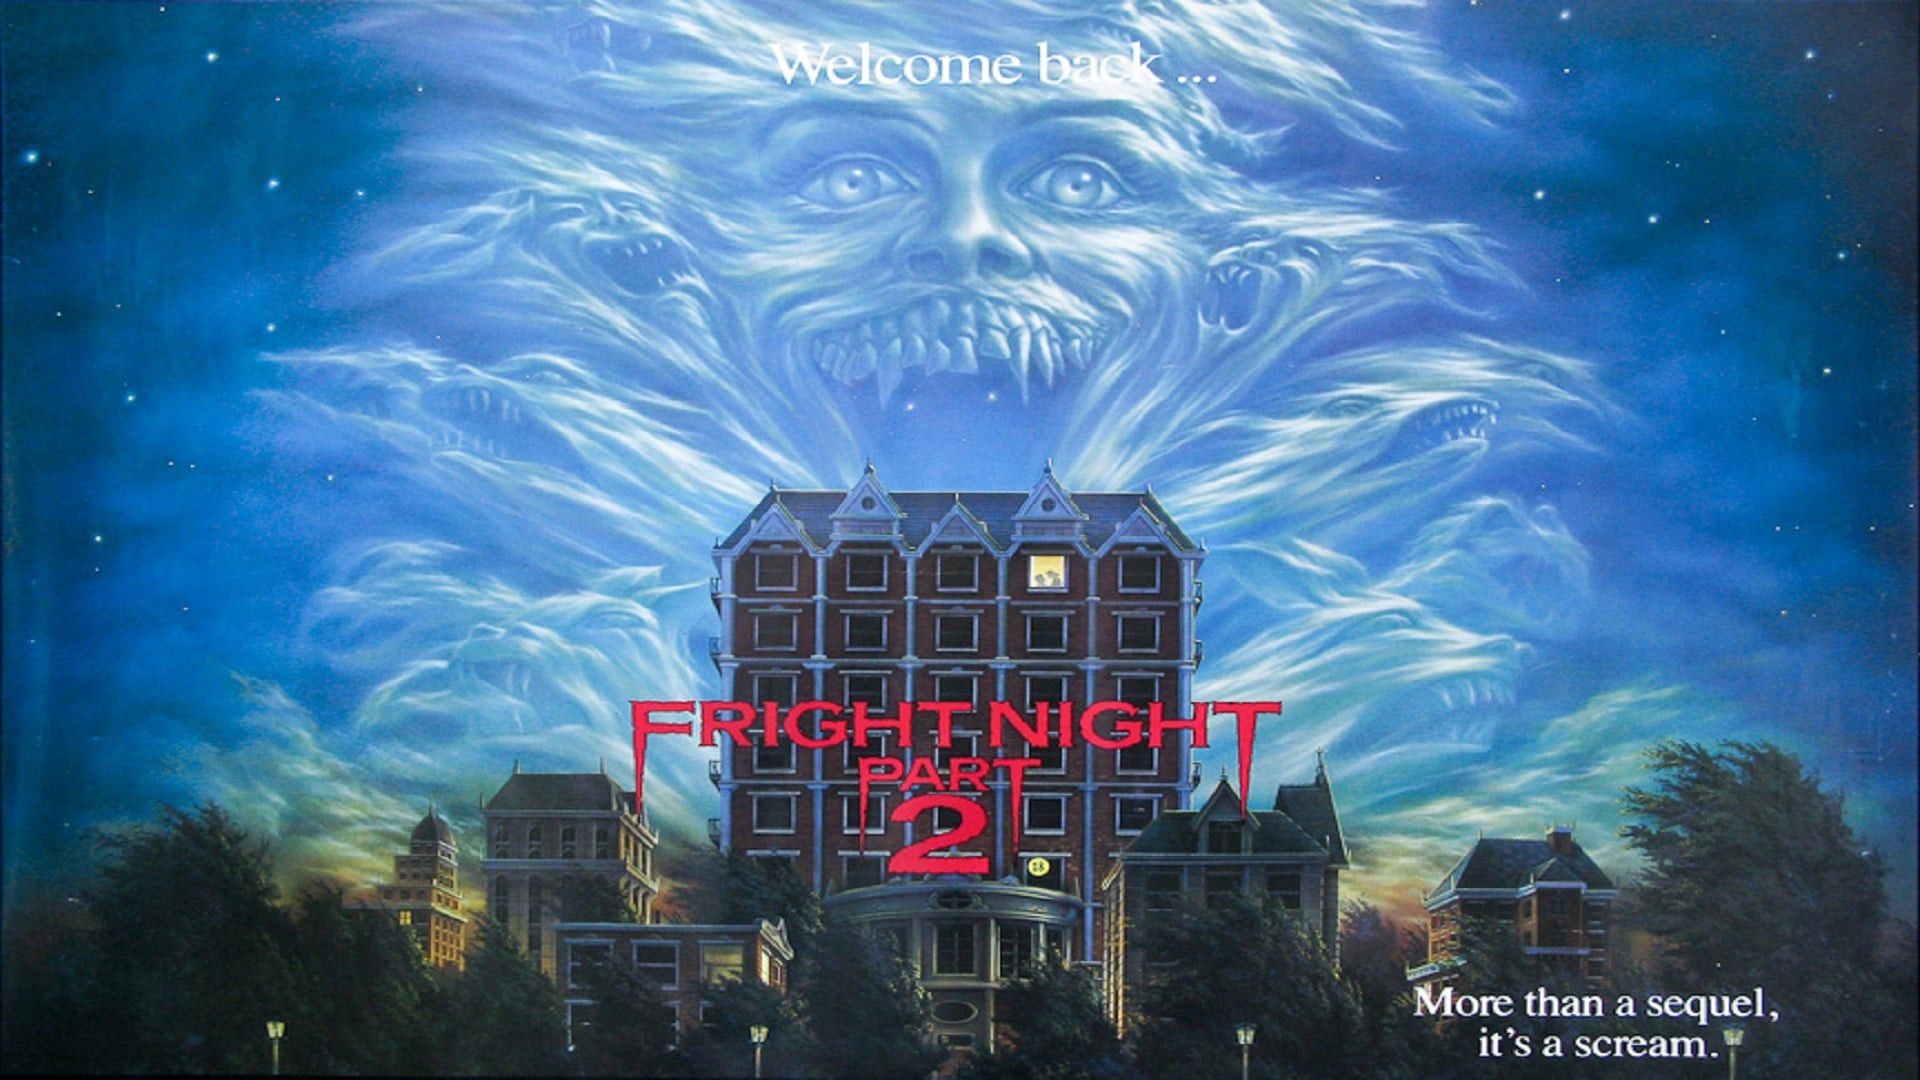 Fright Night Part 2 (1988). FilmFed, Ratings, Reviews, and Trailers